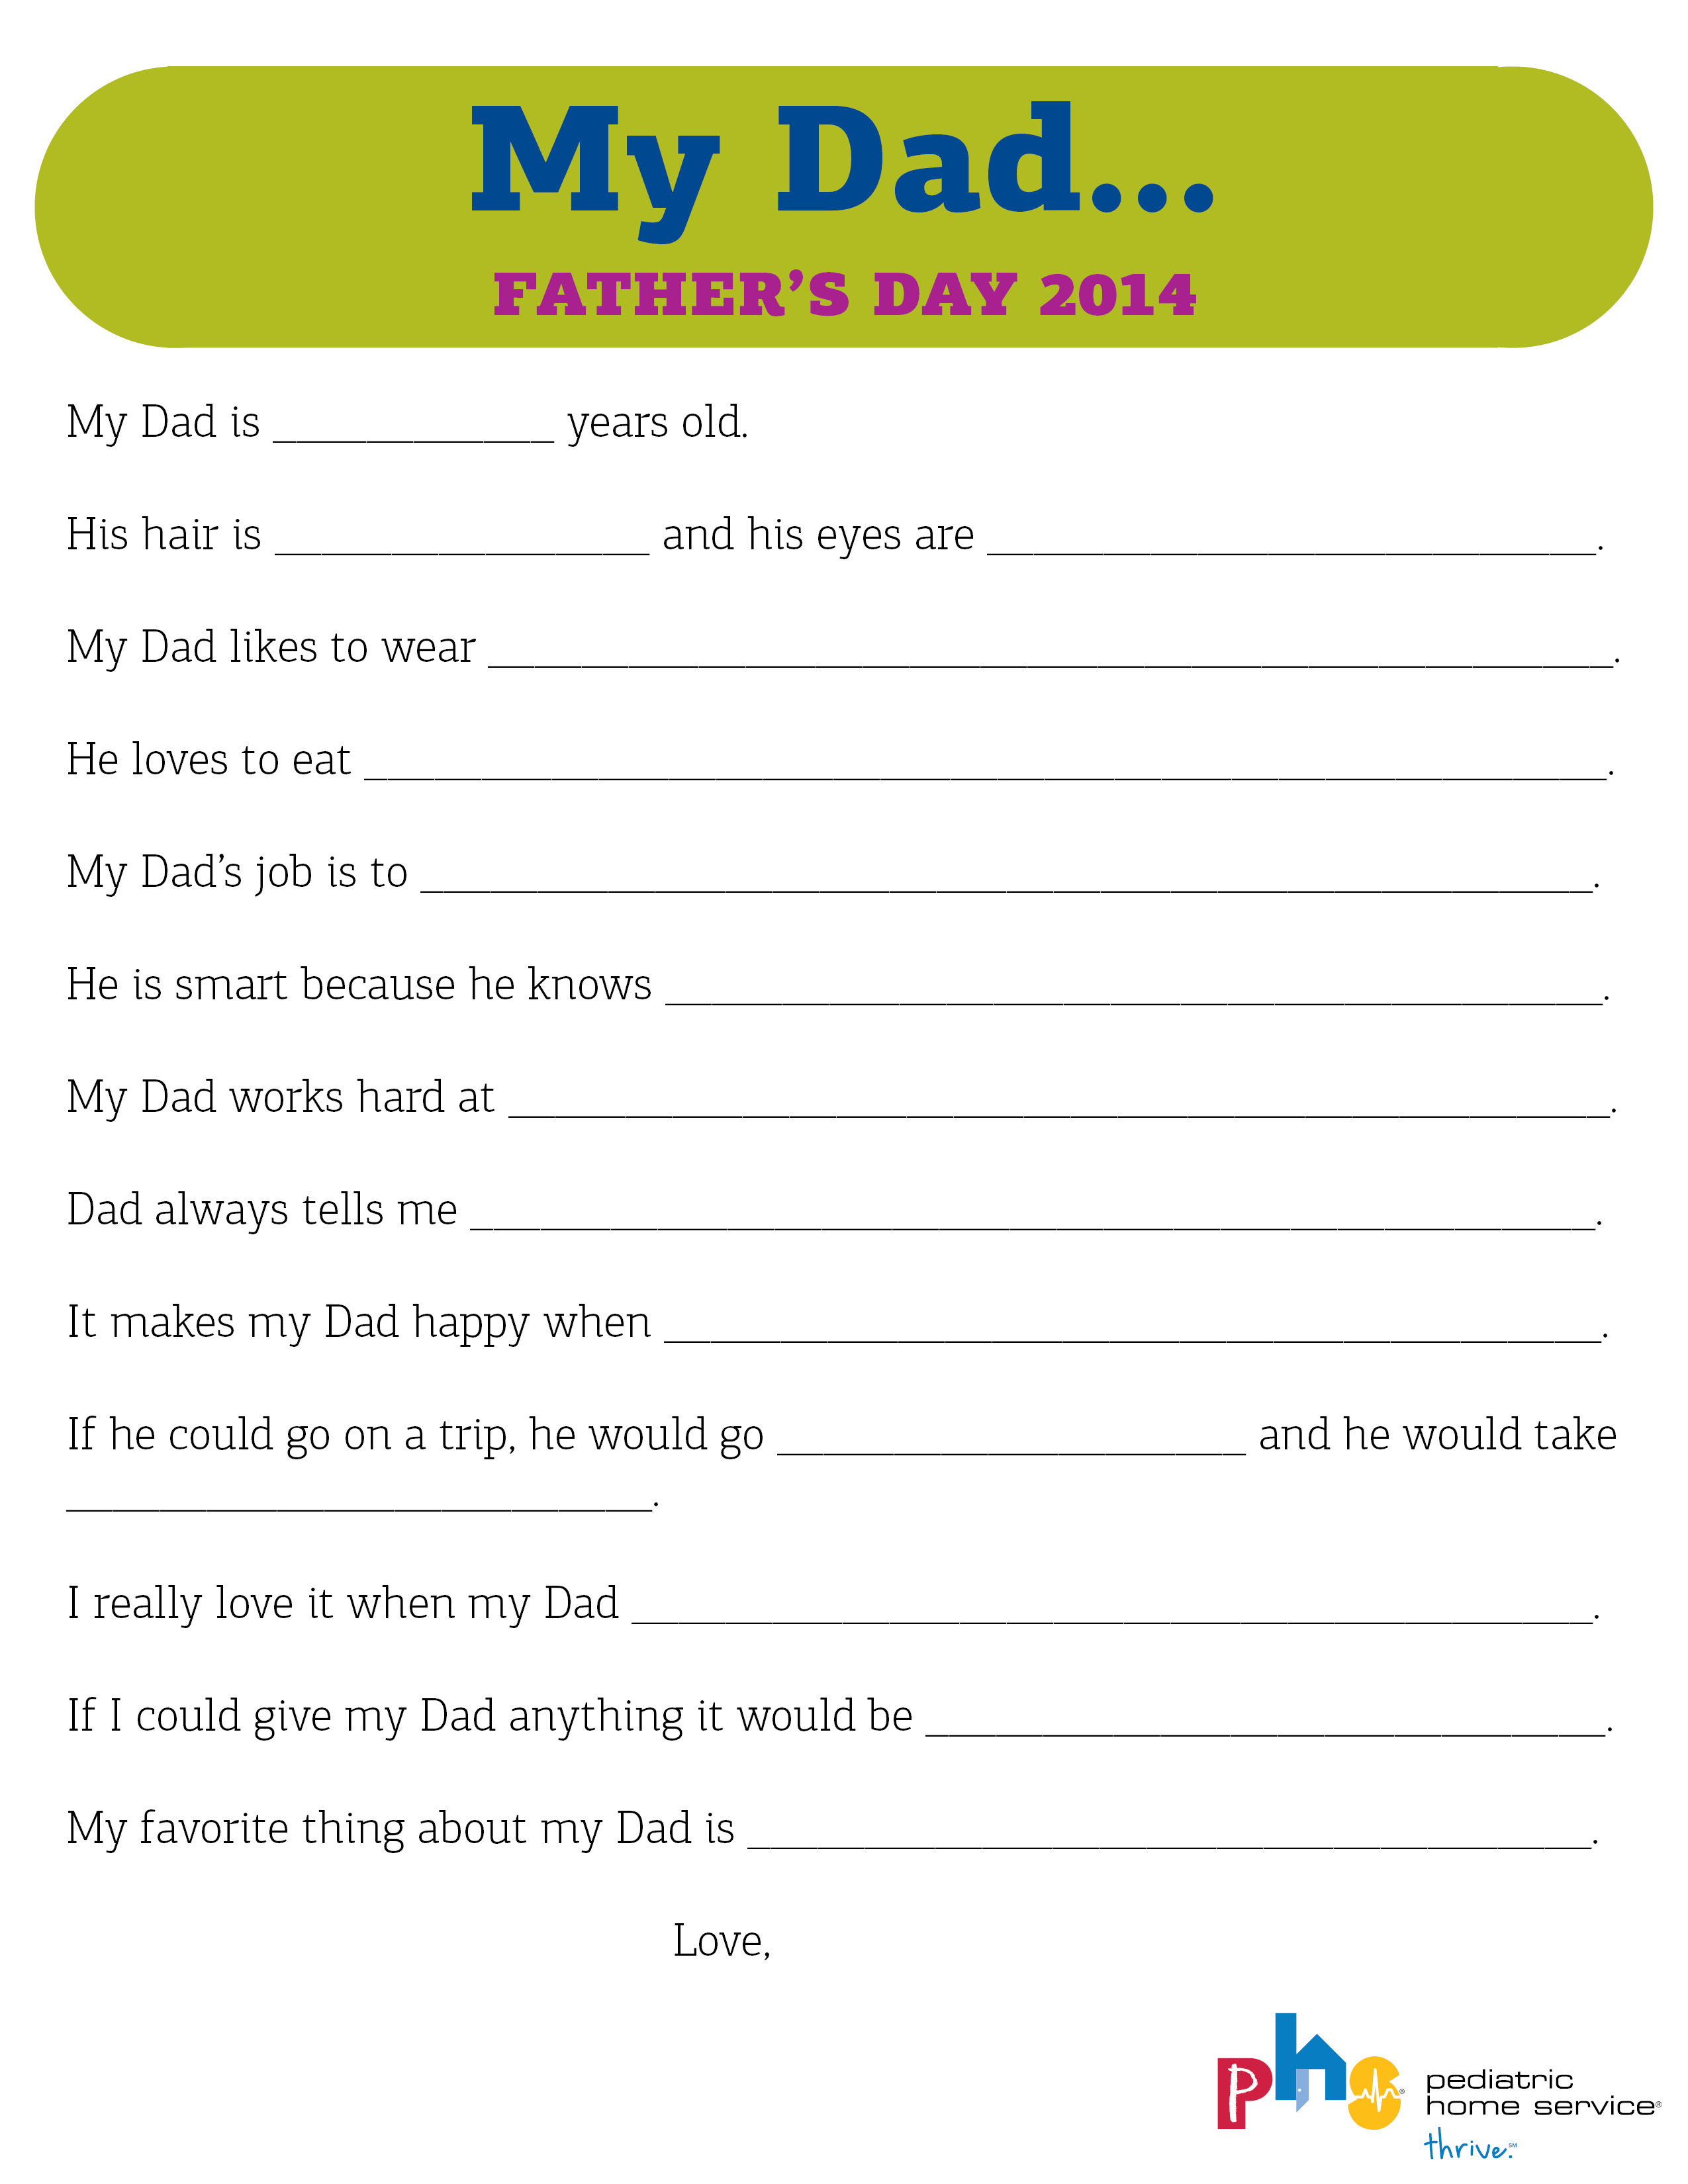 All About Dad A Father's Day Printable Pediatric Home Service